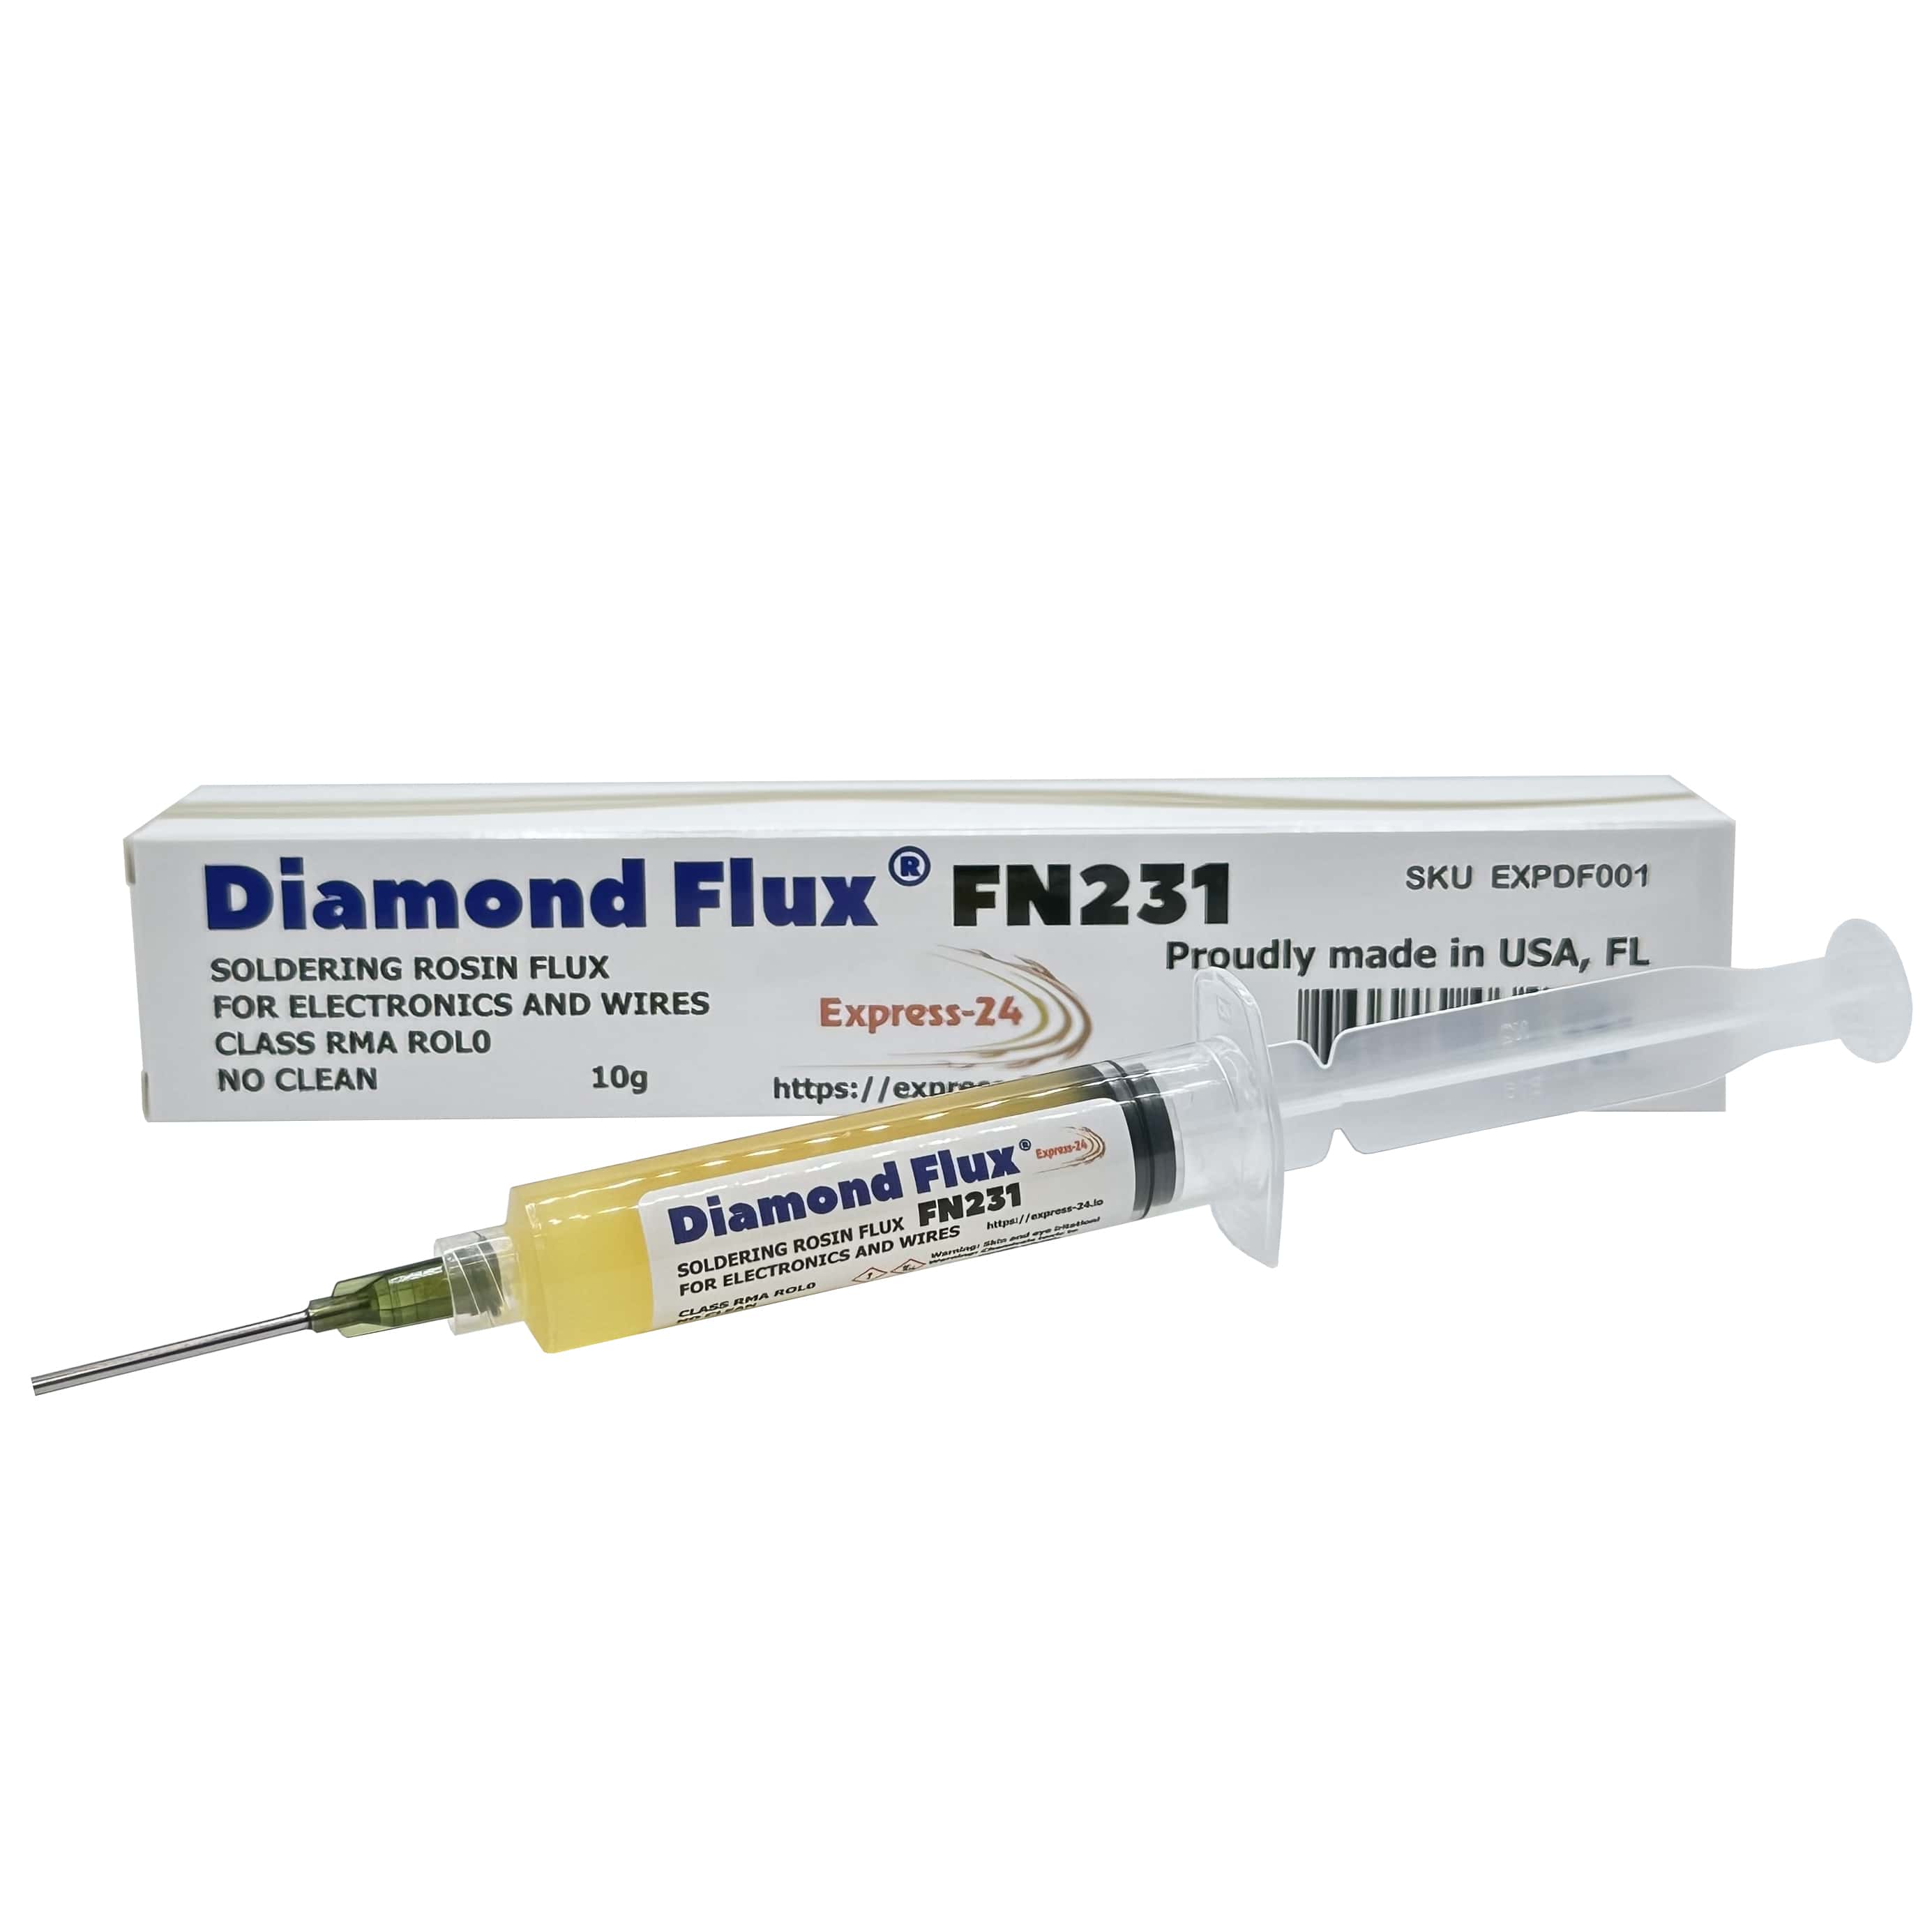 the part number is Diamond Flux FN231